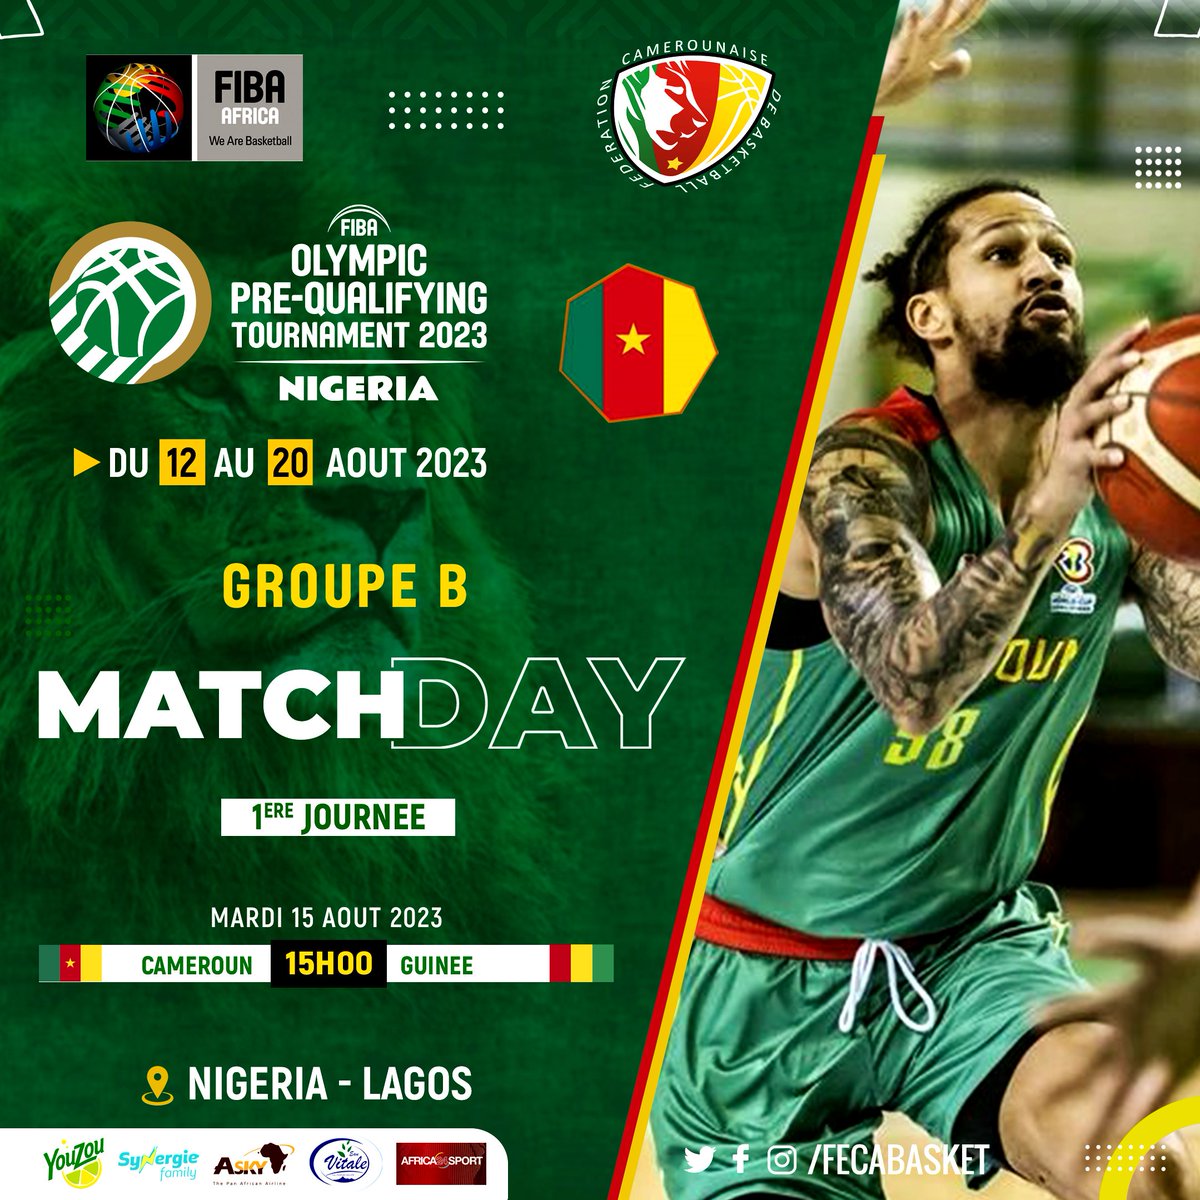 OLYMPIC PRE-QUALIFYING TOURNAMENT 2023-NIGERIA. Team Cameroon will take on Guinea for their first Game. NB: There will be no free broadcast on YouTube. All games will be shown on courtside1891.basketball #olympics2024 #basketball #fecabasket